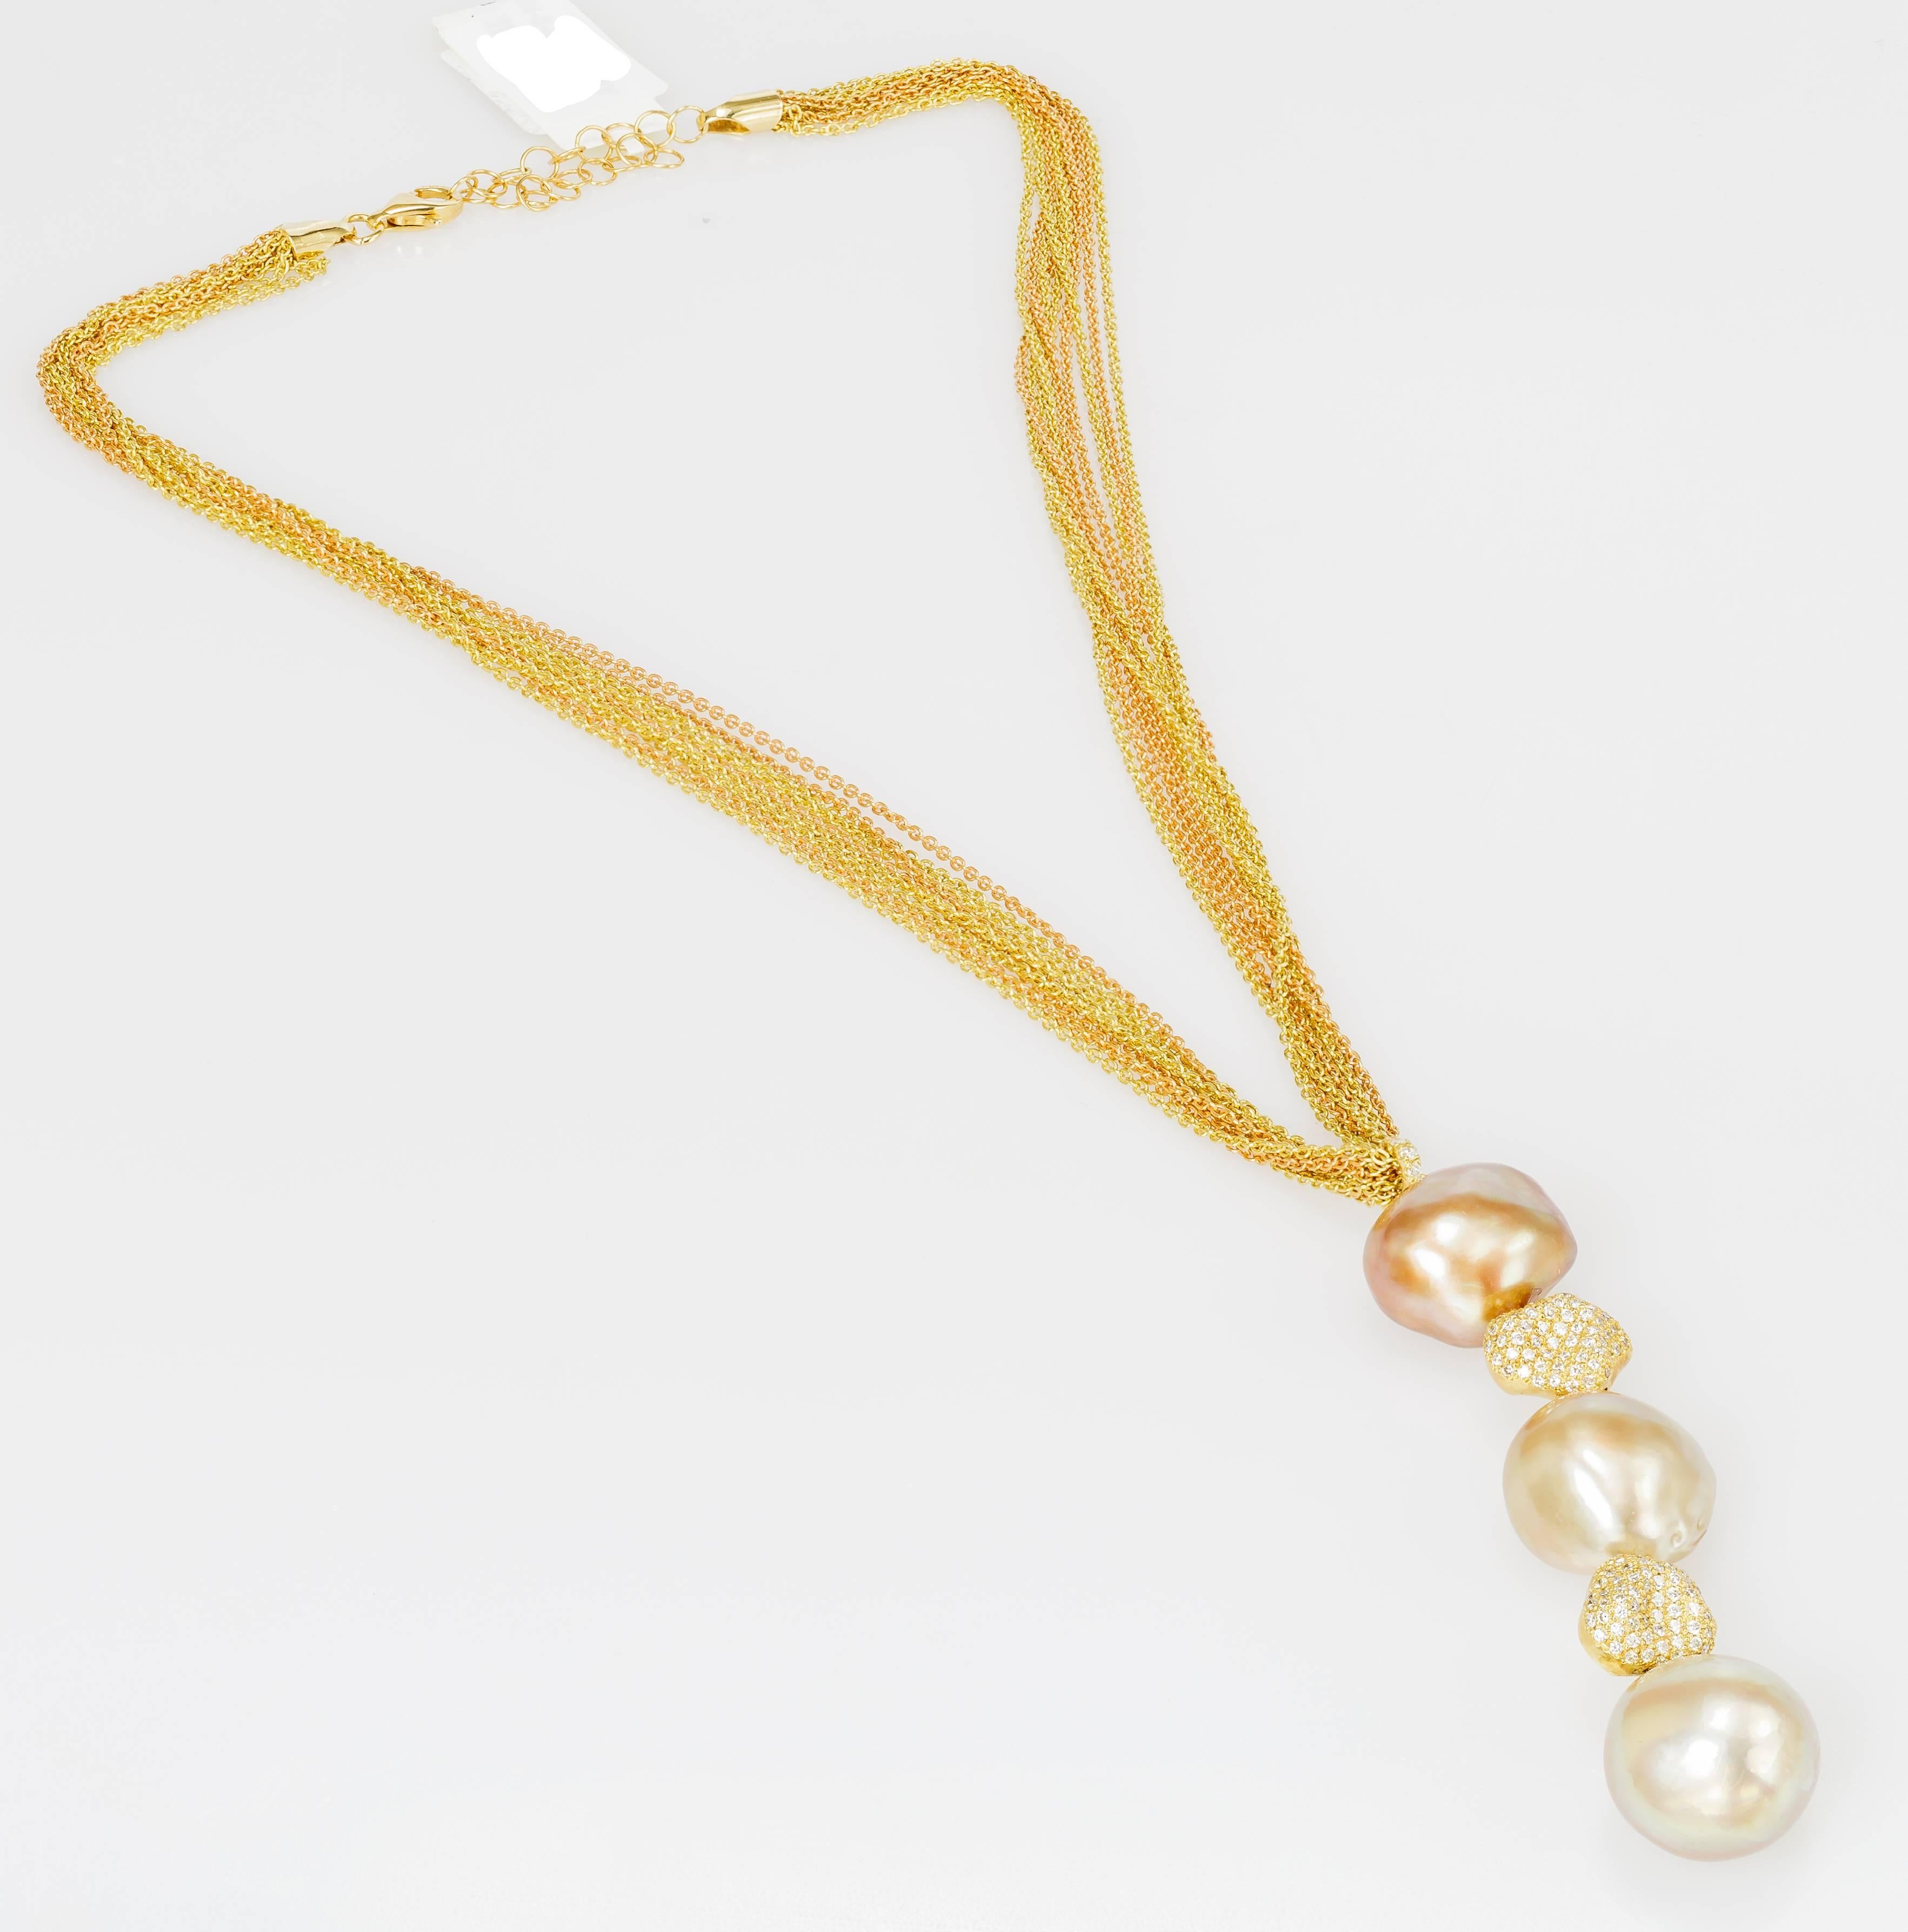 This 18k yellow and rose gold Yvel necklace features 3 South Sea baroque pearls. The gold beads on the pendant are set with diamonds totaling 1.13 ct.  The multi-strand mixed metal chain is 16 inches long and the pendant extends from there.